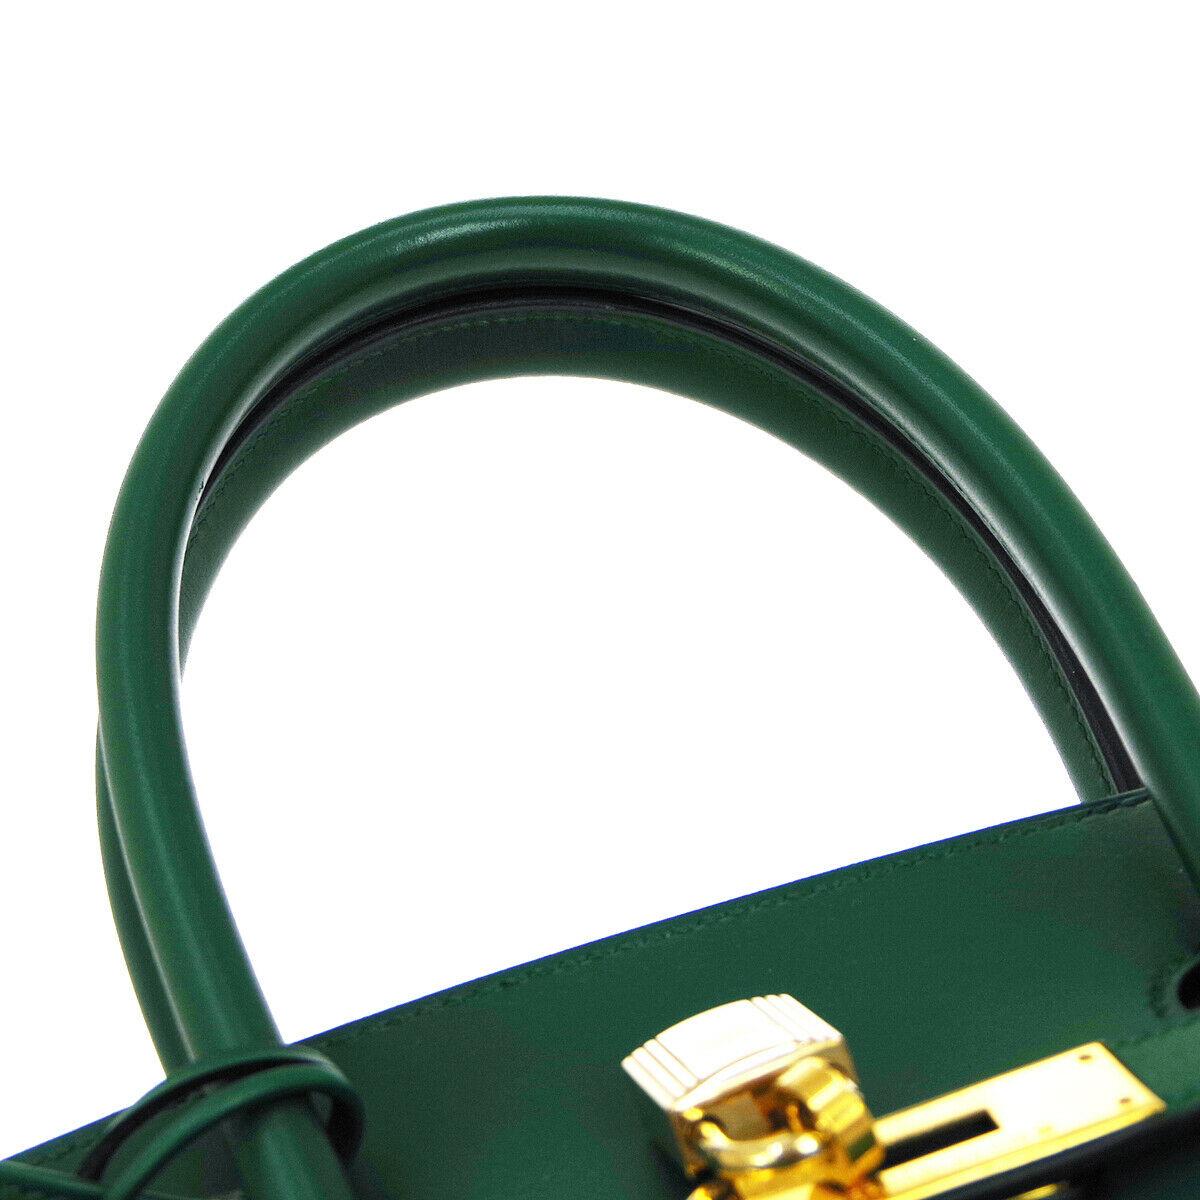 Hermes Birkin 35 Green Leather Gold Top Handle Satchel Travel Tote Bag

Leather
Gold tone hardware
Leather lining
Date code present
Made in France
Handle drop 4